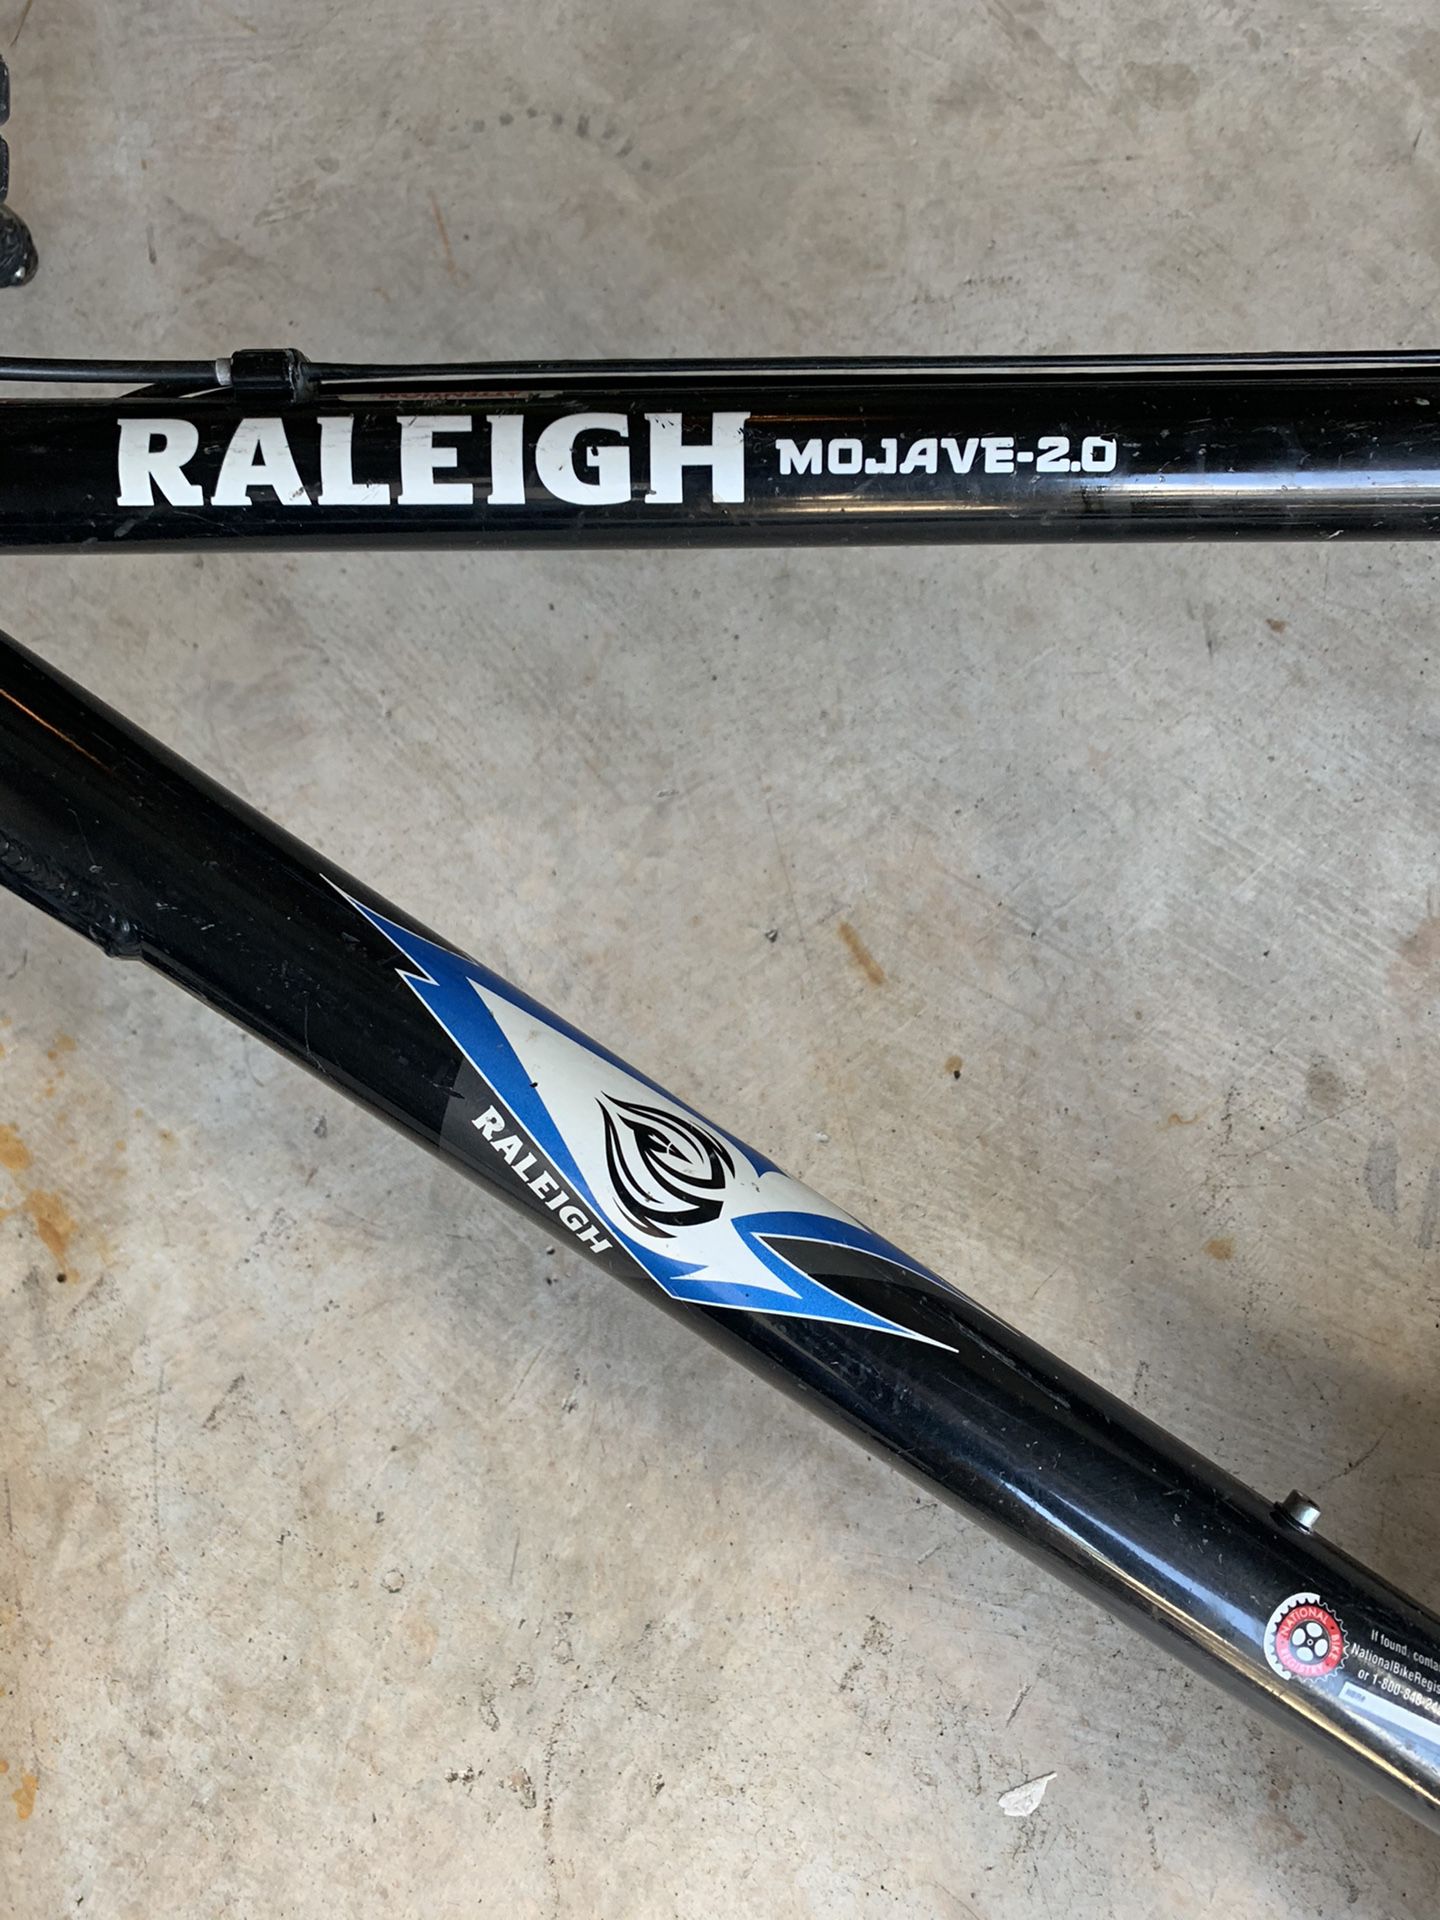 Raleigh Mojave 2.0 hardtail mountain bike frame for rebuild or parts